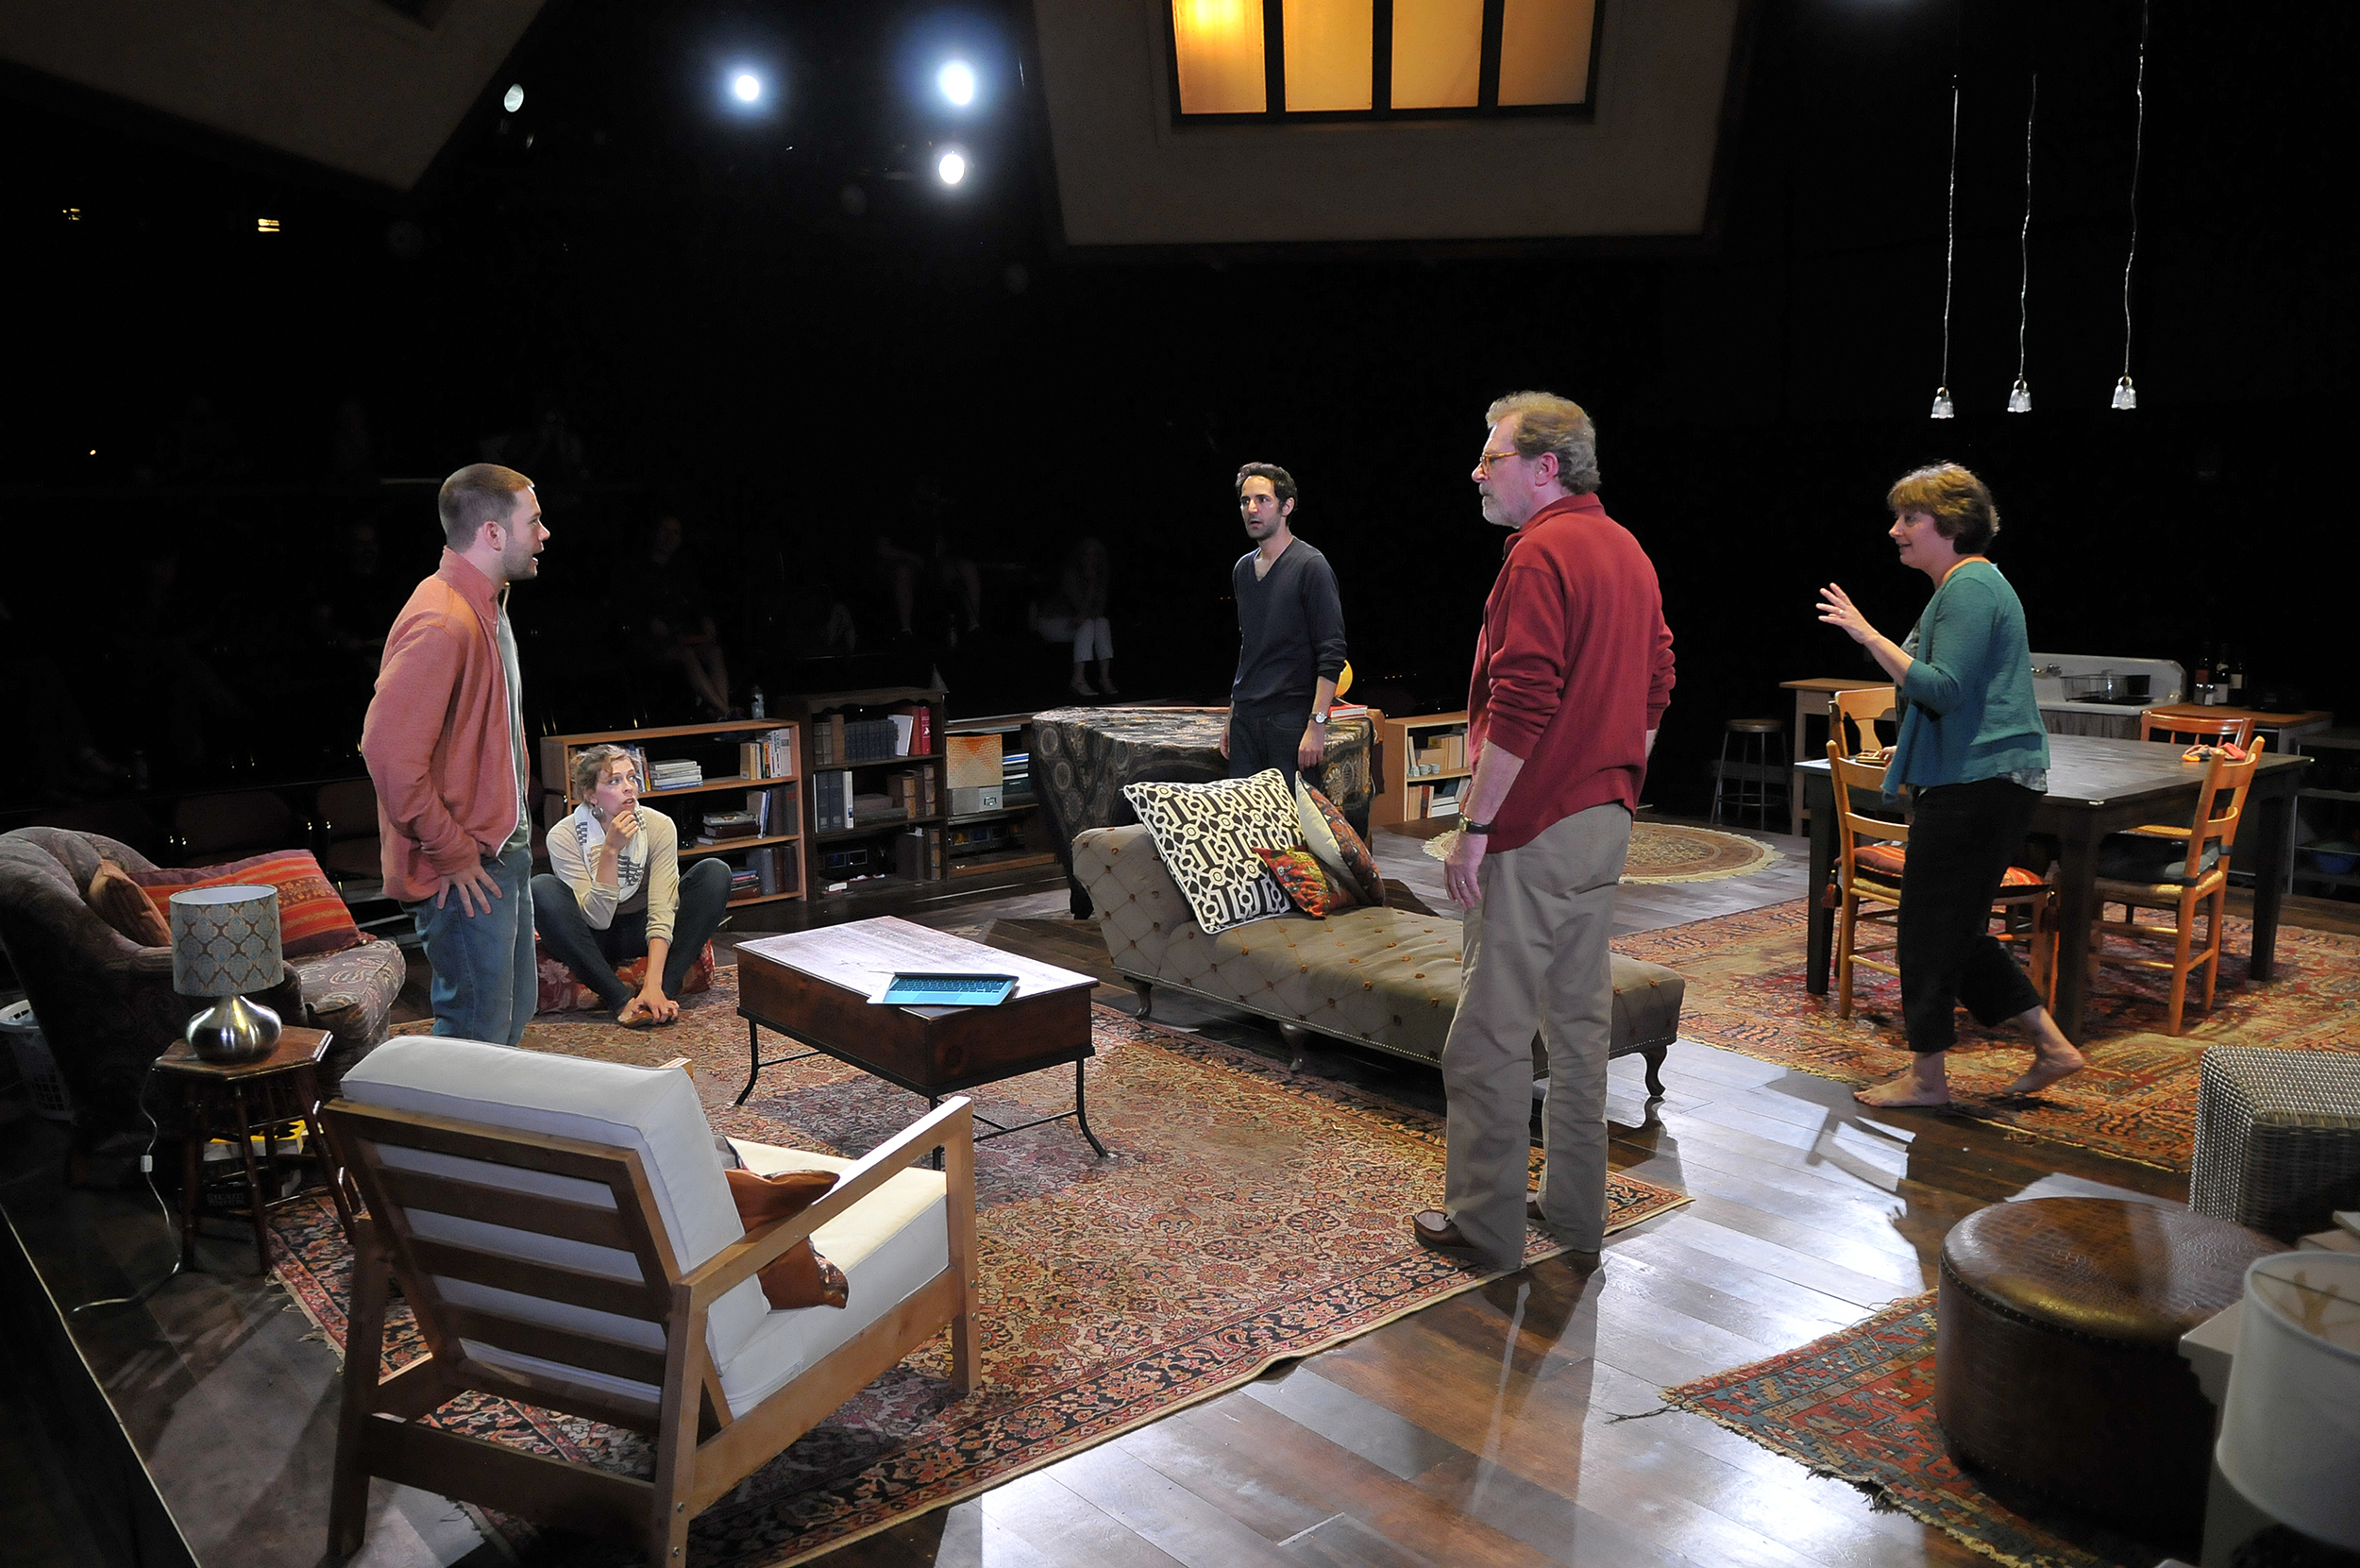 James Caverly, Kathryn Miles, Erica Spyres, Patrick Shea, Adrianne Krstansky, and Nael Nacer in the SpeakEasy Stage Company production of TRIBES directed by M. Bevin O'Gara. Photo: Craig Bailey